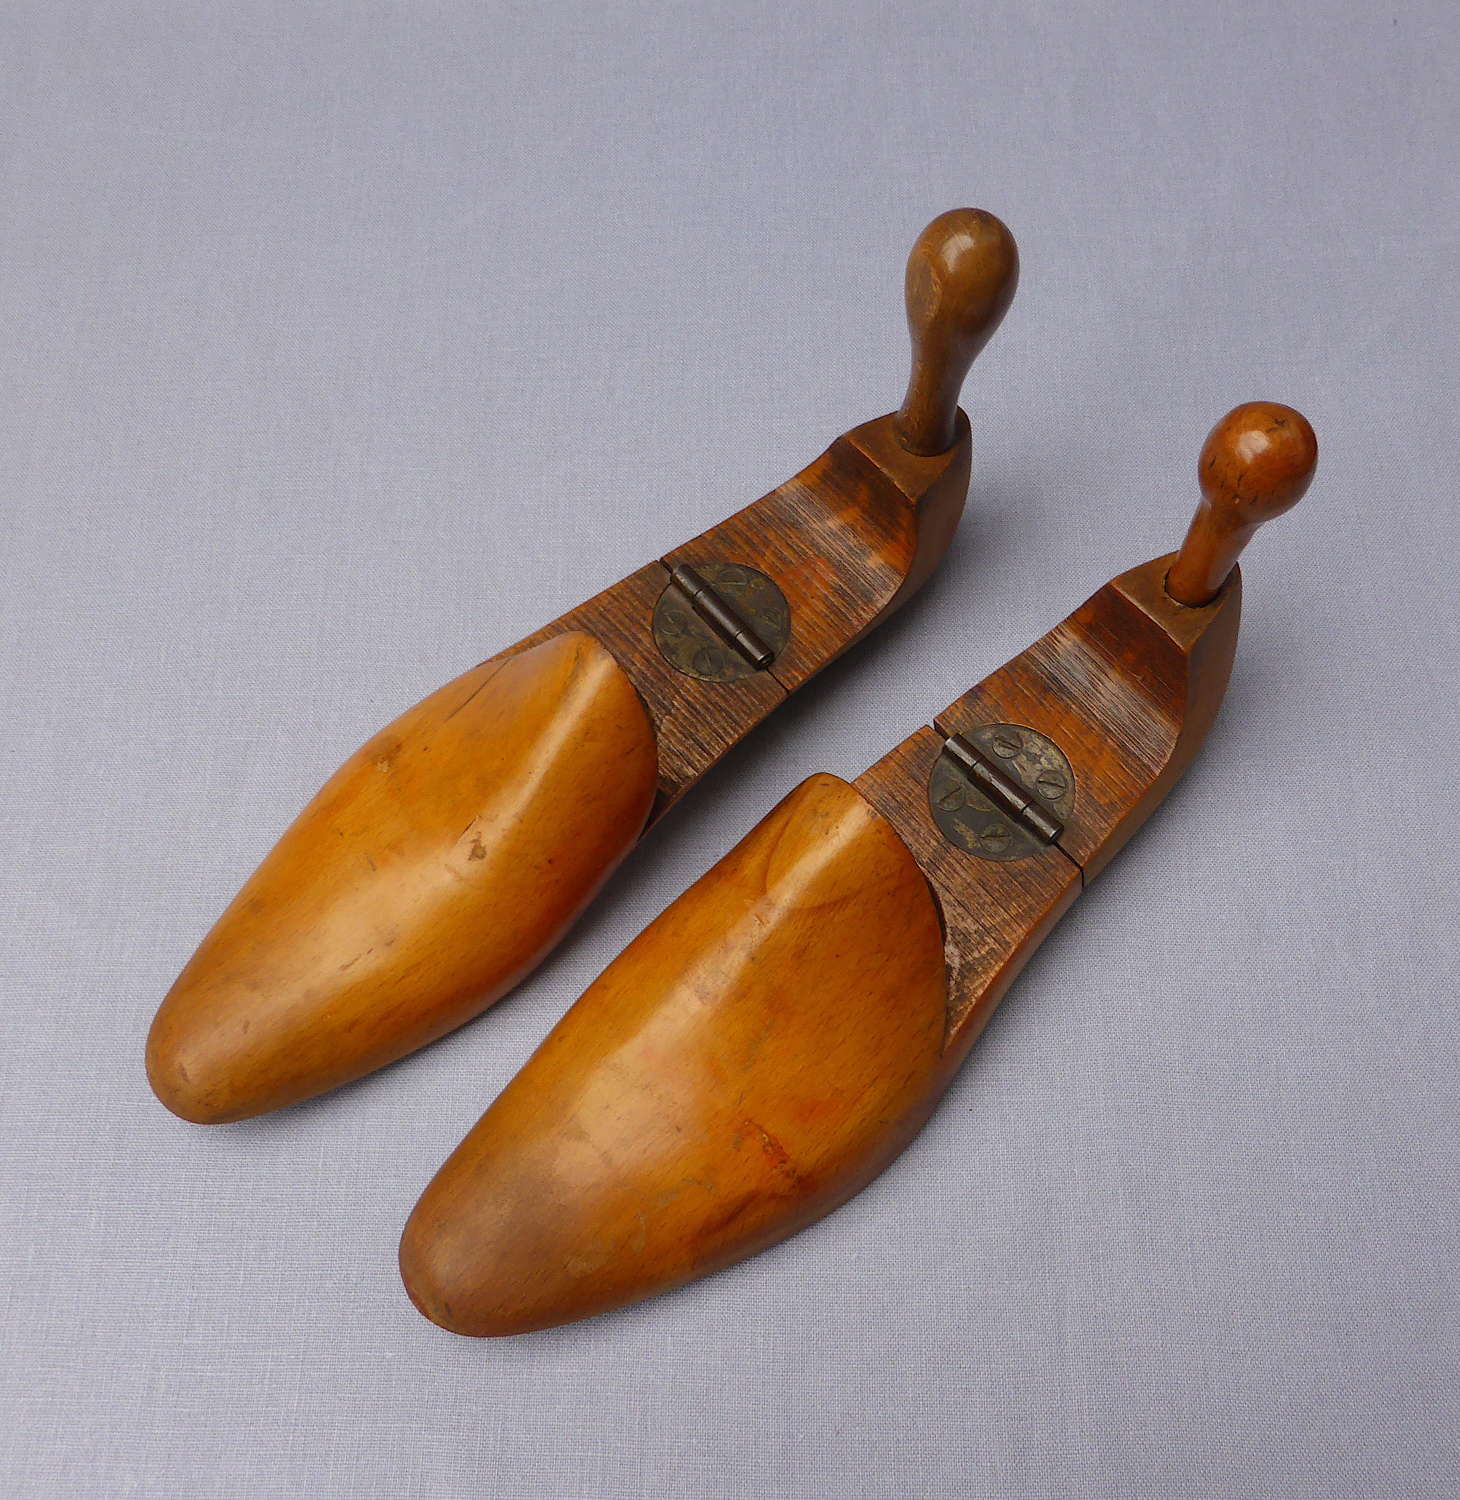 Pair of Early 20th Century Wooden Golf Shoe Lasts